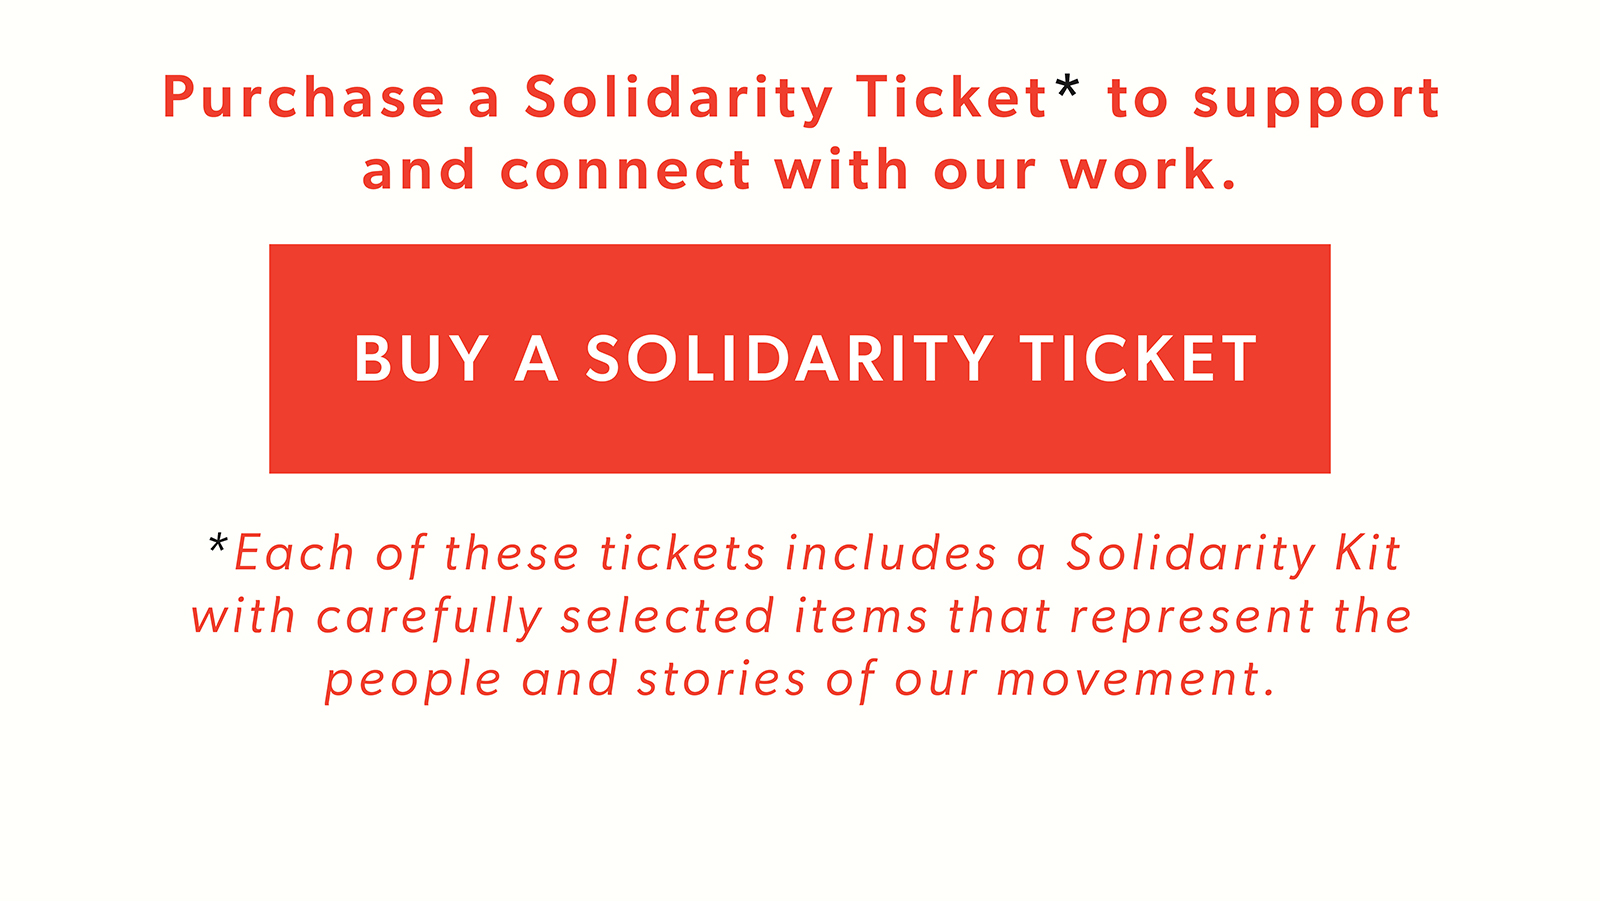 Purchase a Solidarity Ticket to connect with our work